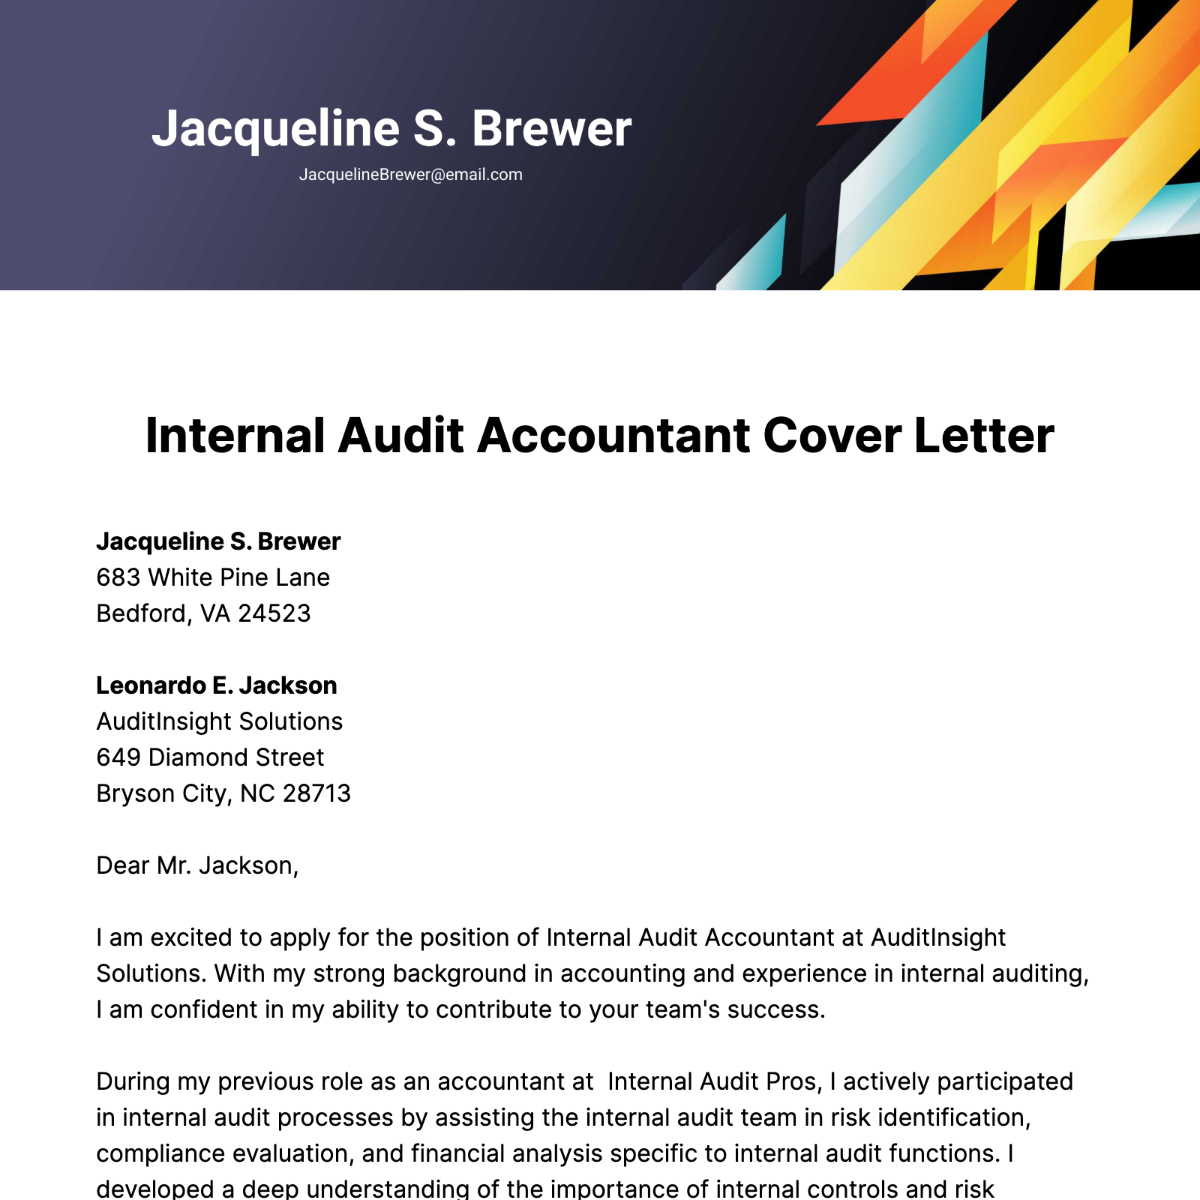 Internal Audit Accountant Cover Letter Template